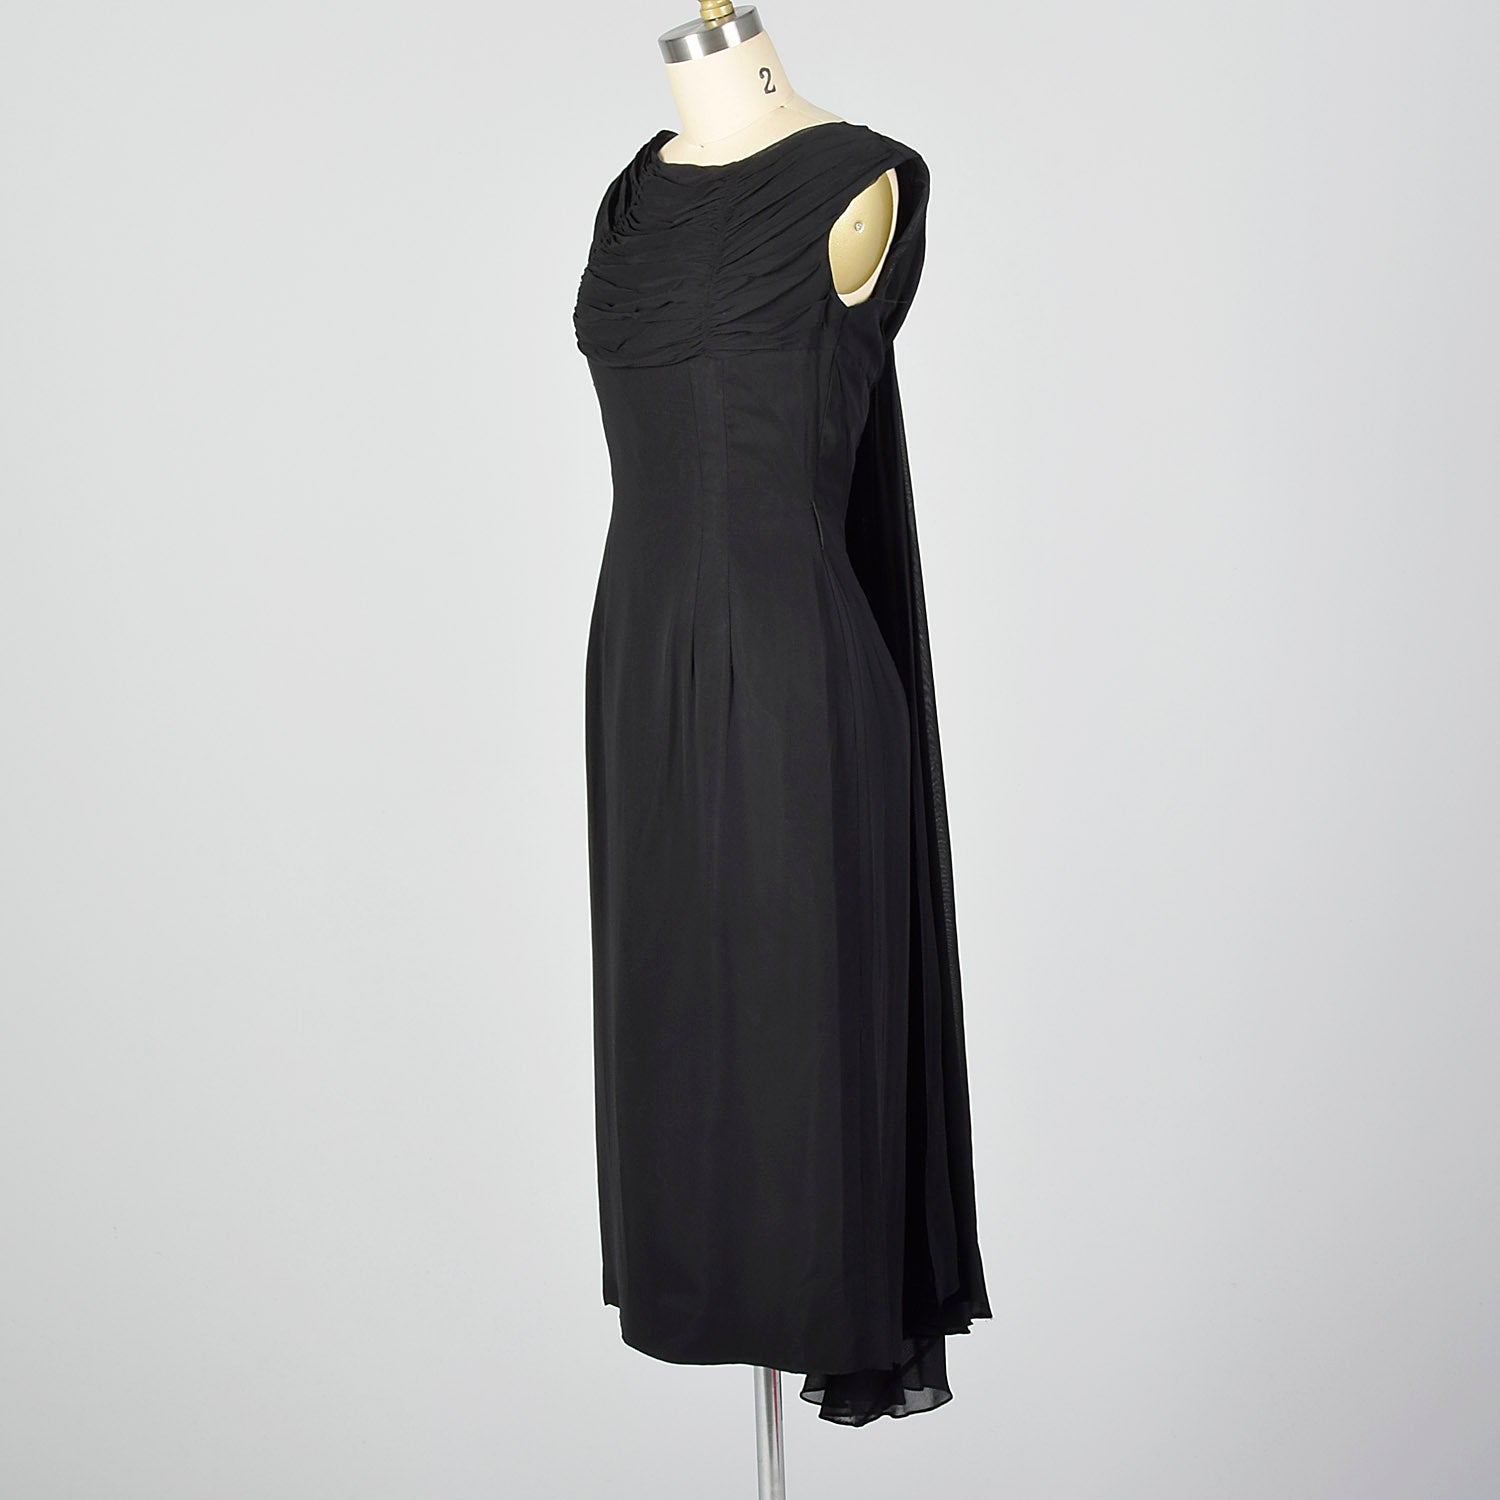 XS 1950s Black Cocktail Dress with Train